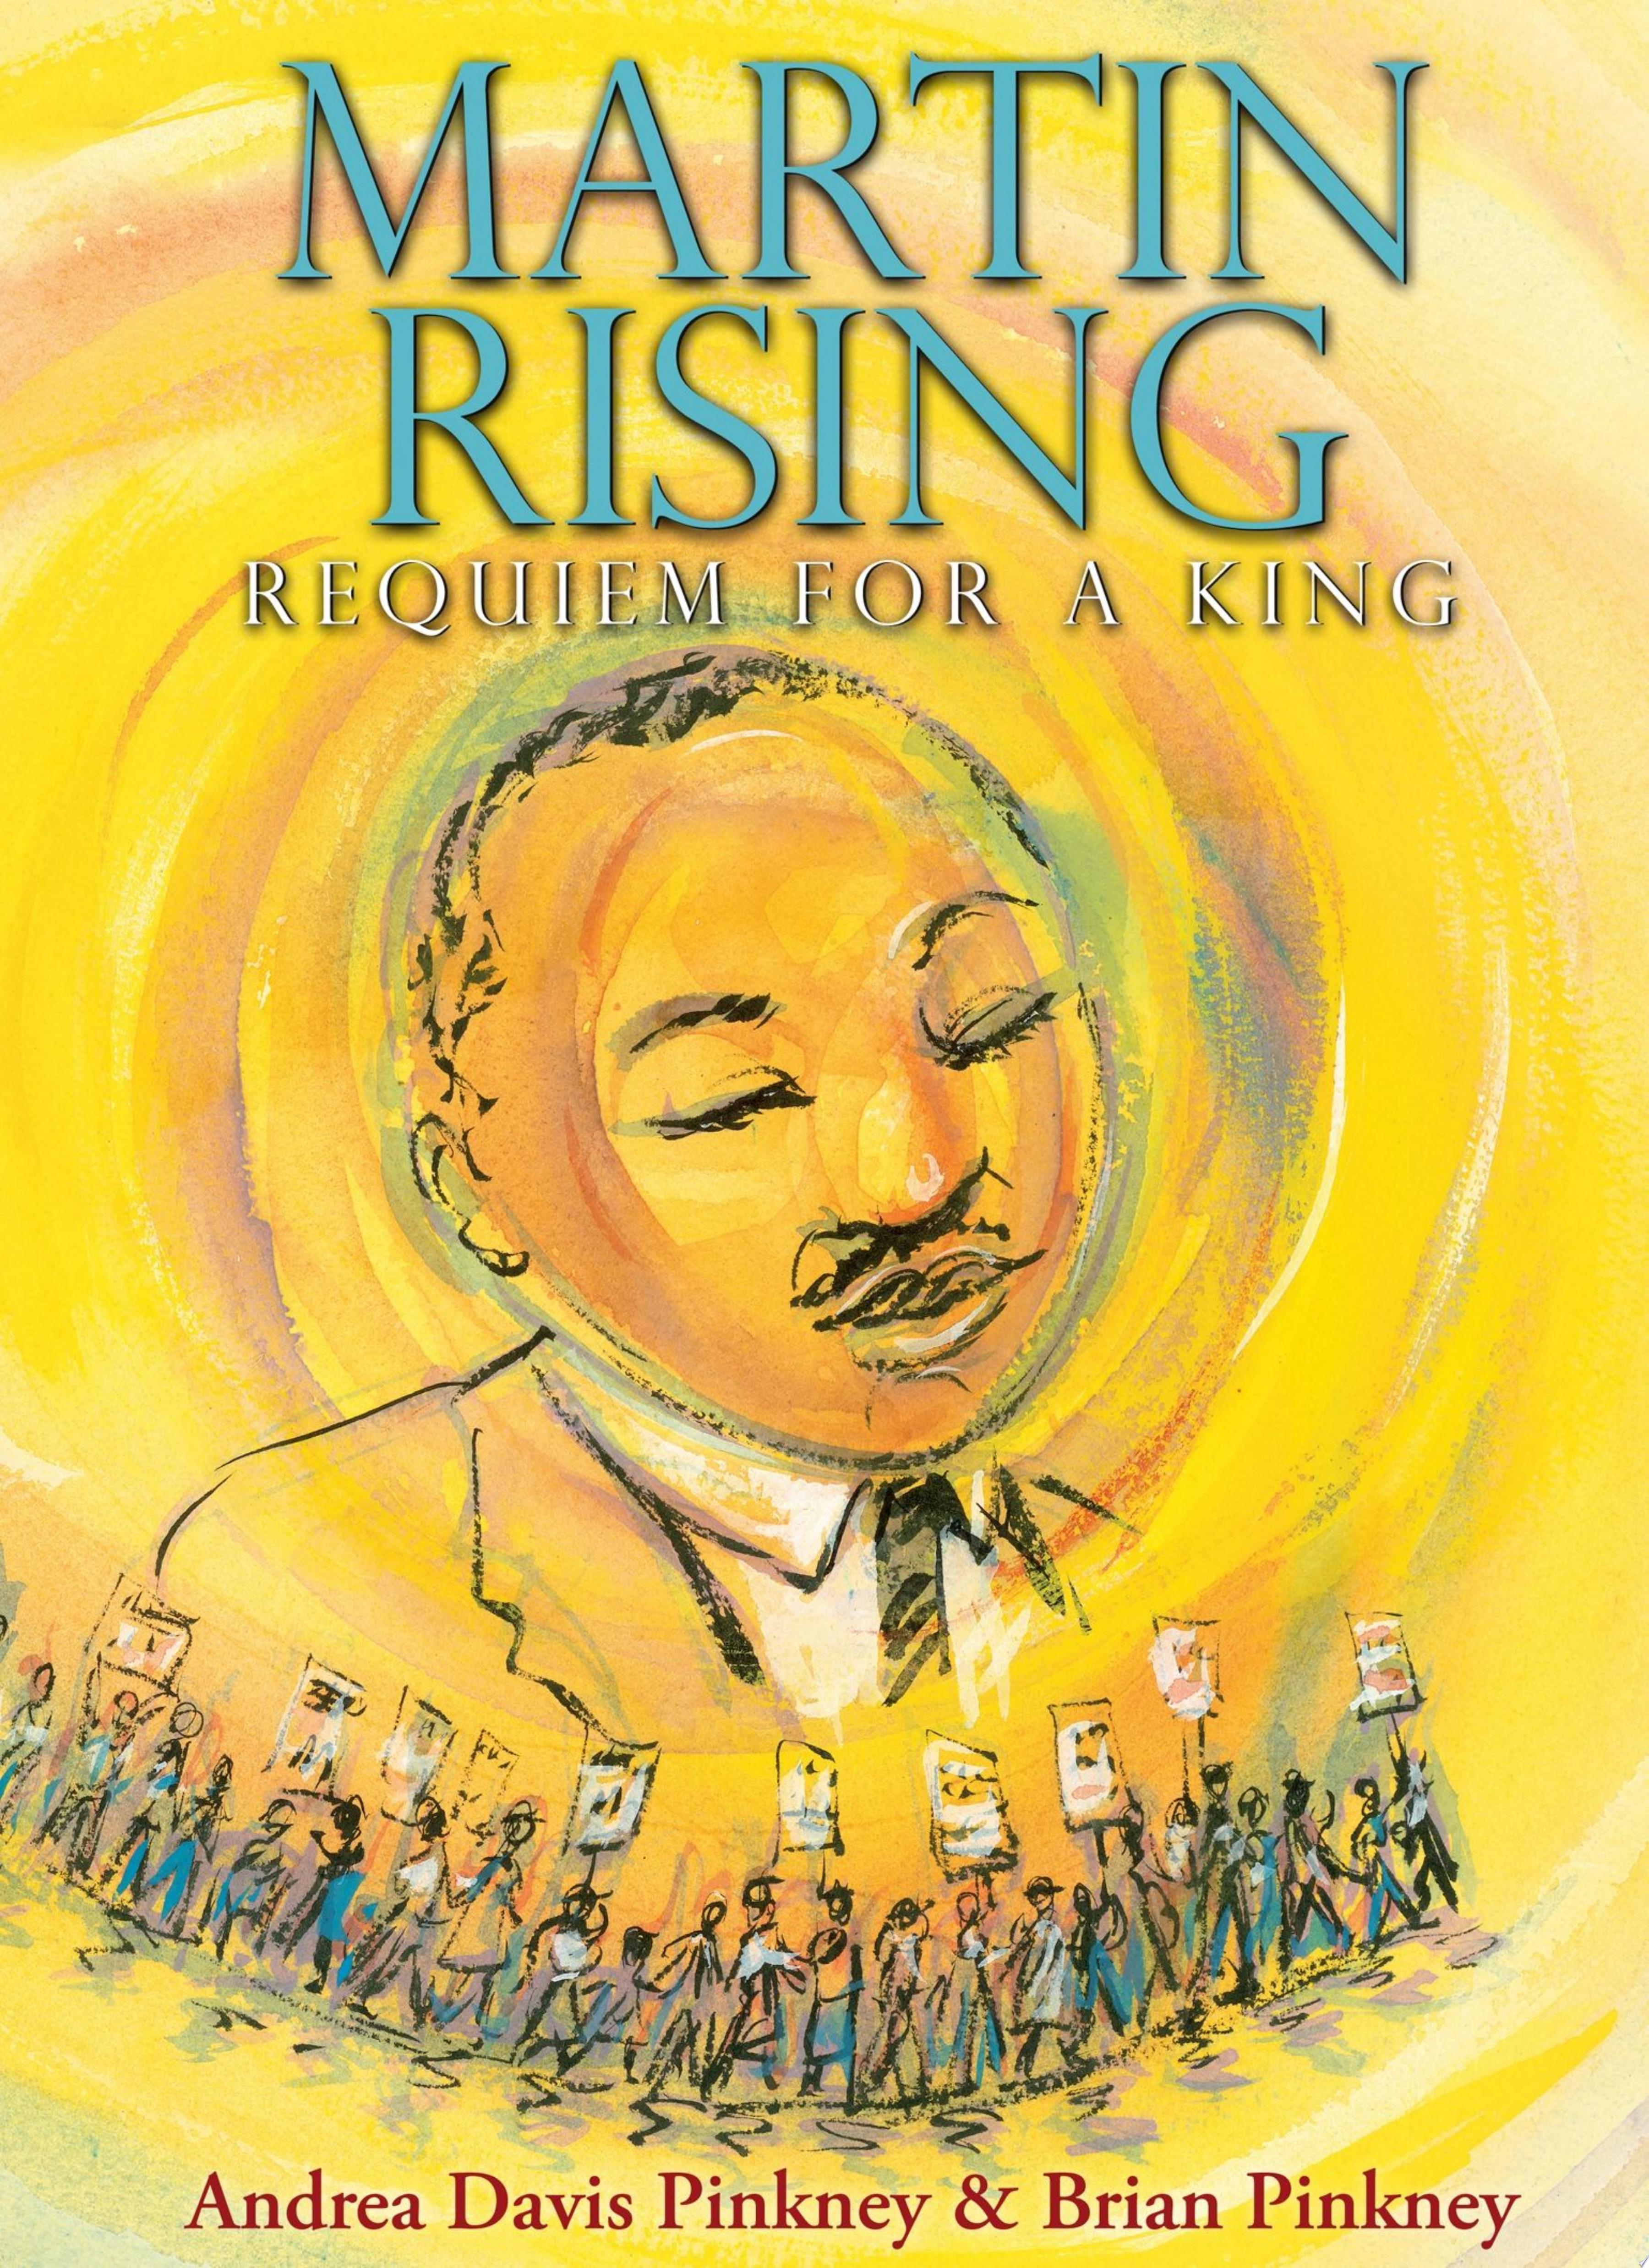 Image for "Martin Rising: Requiem For a King"